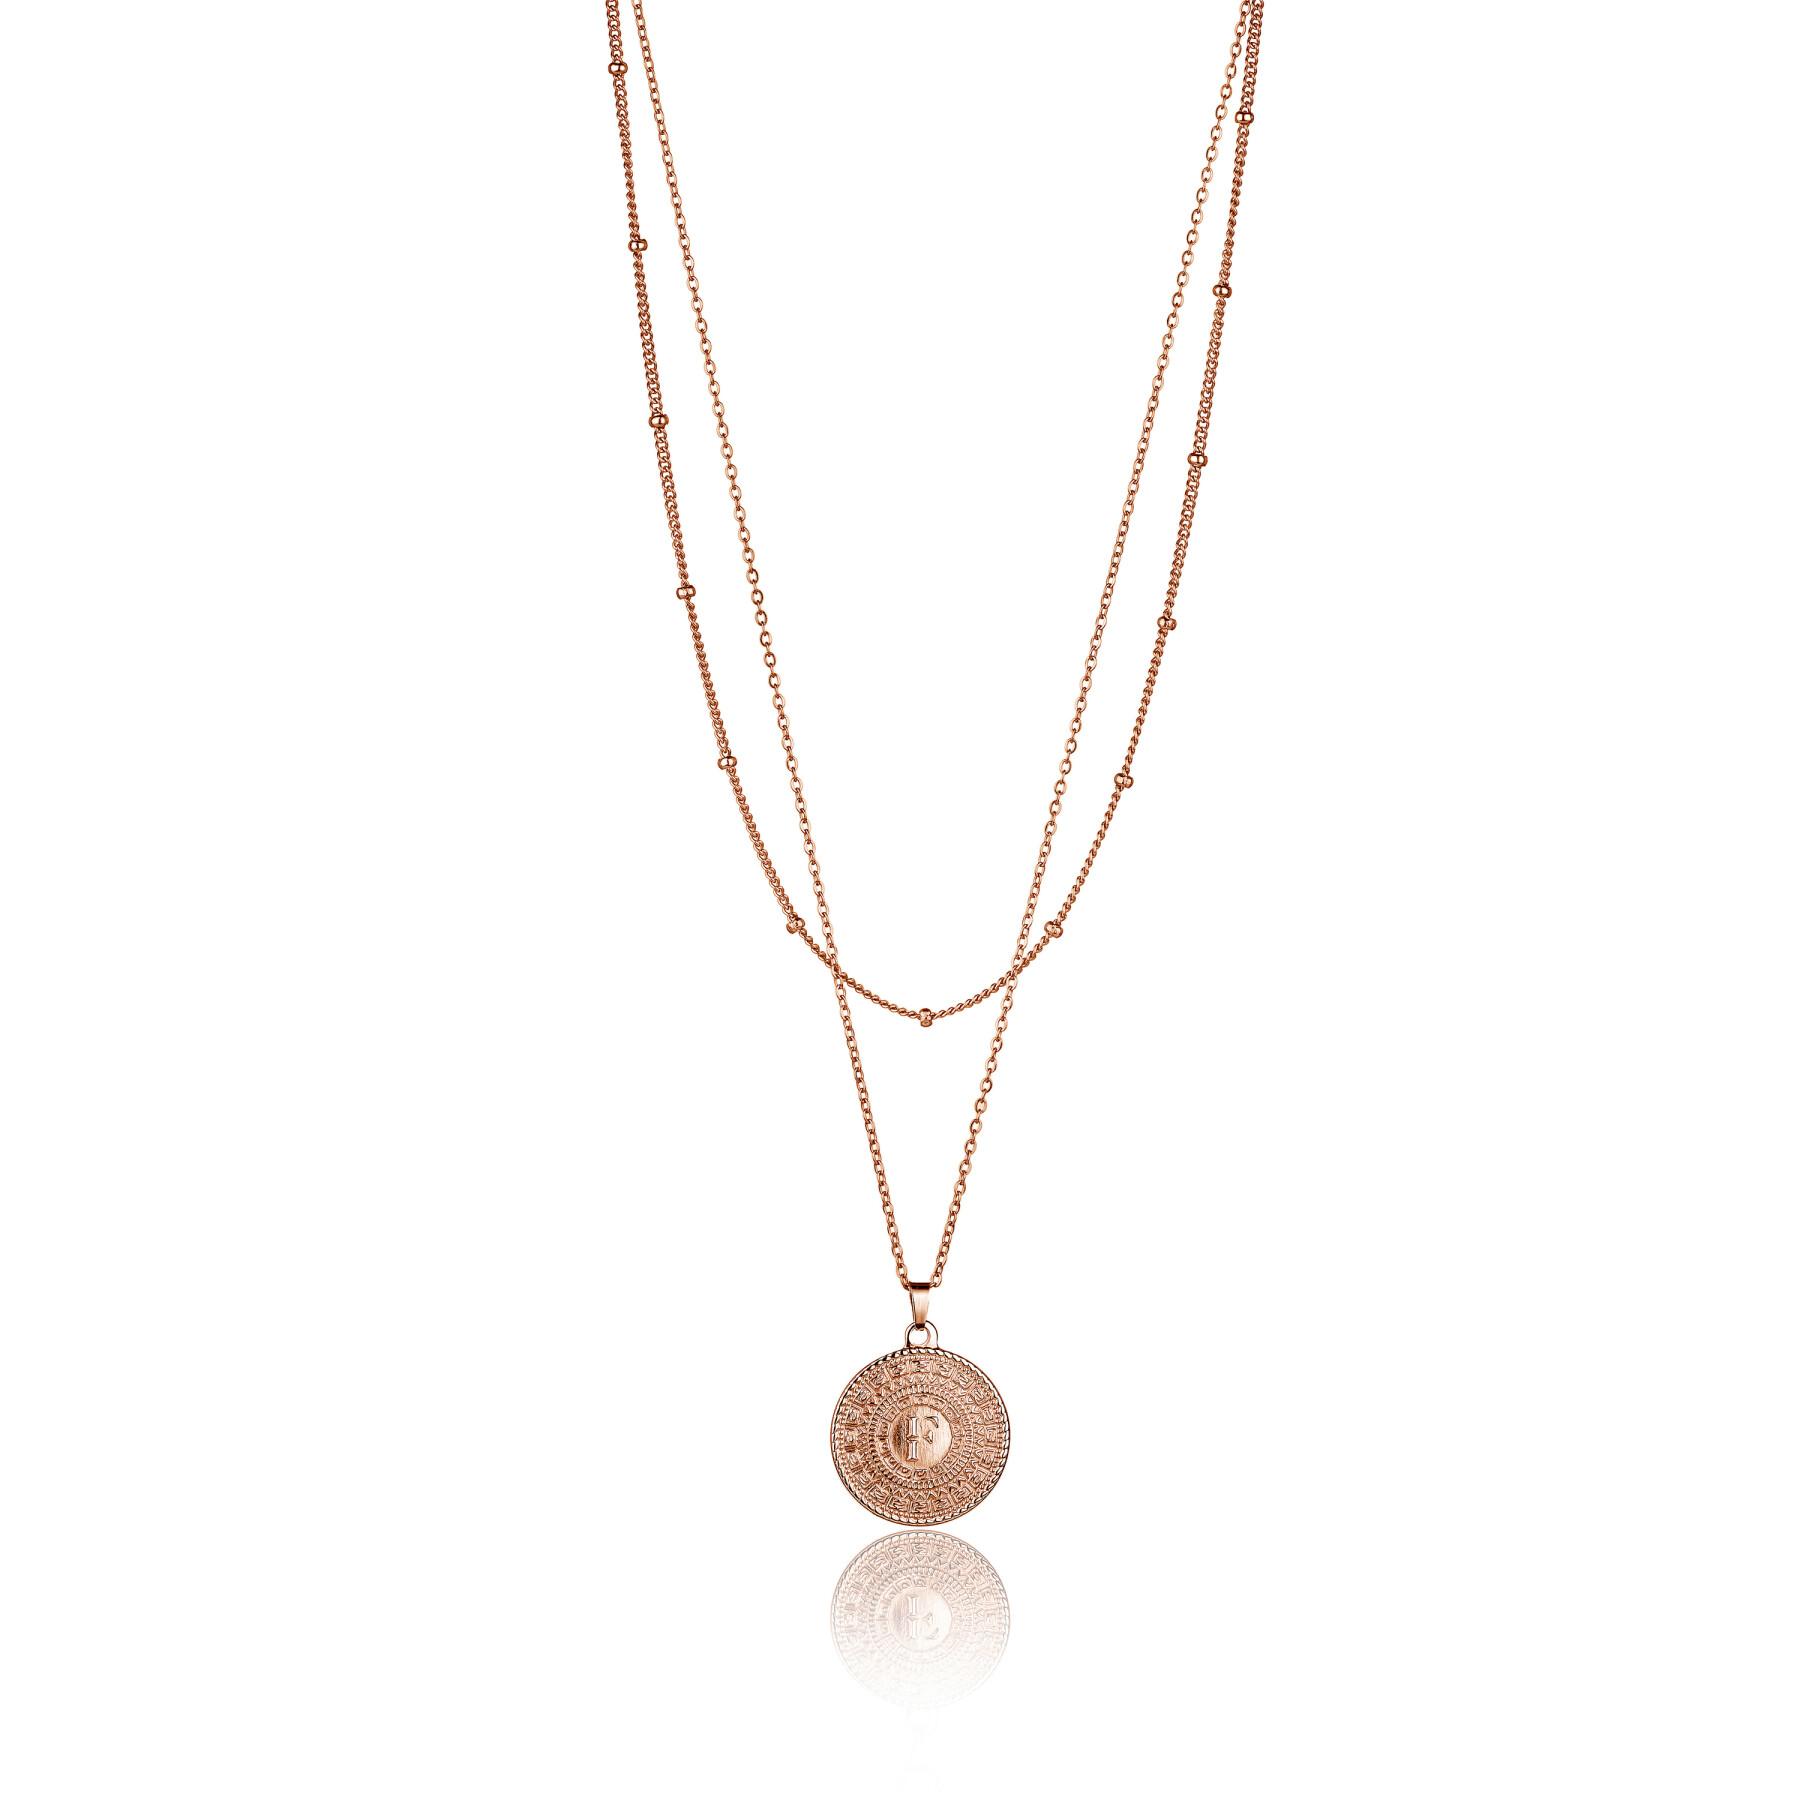 Women's necklace Isabella Ford Brie